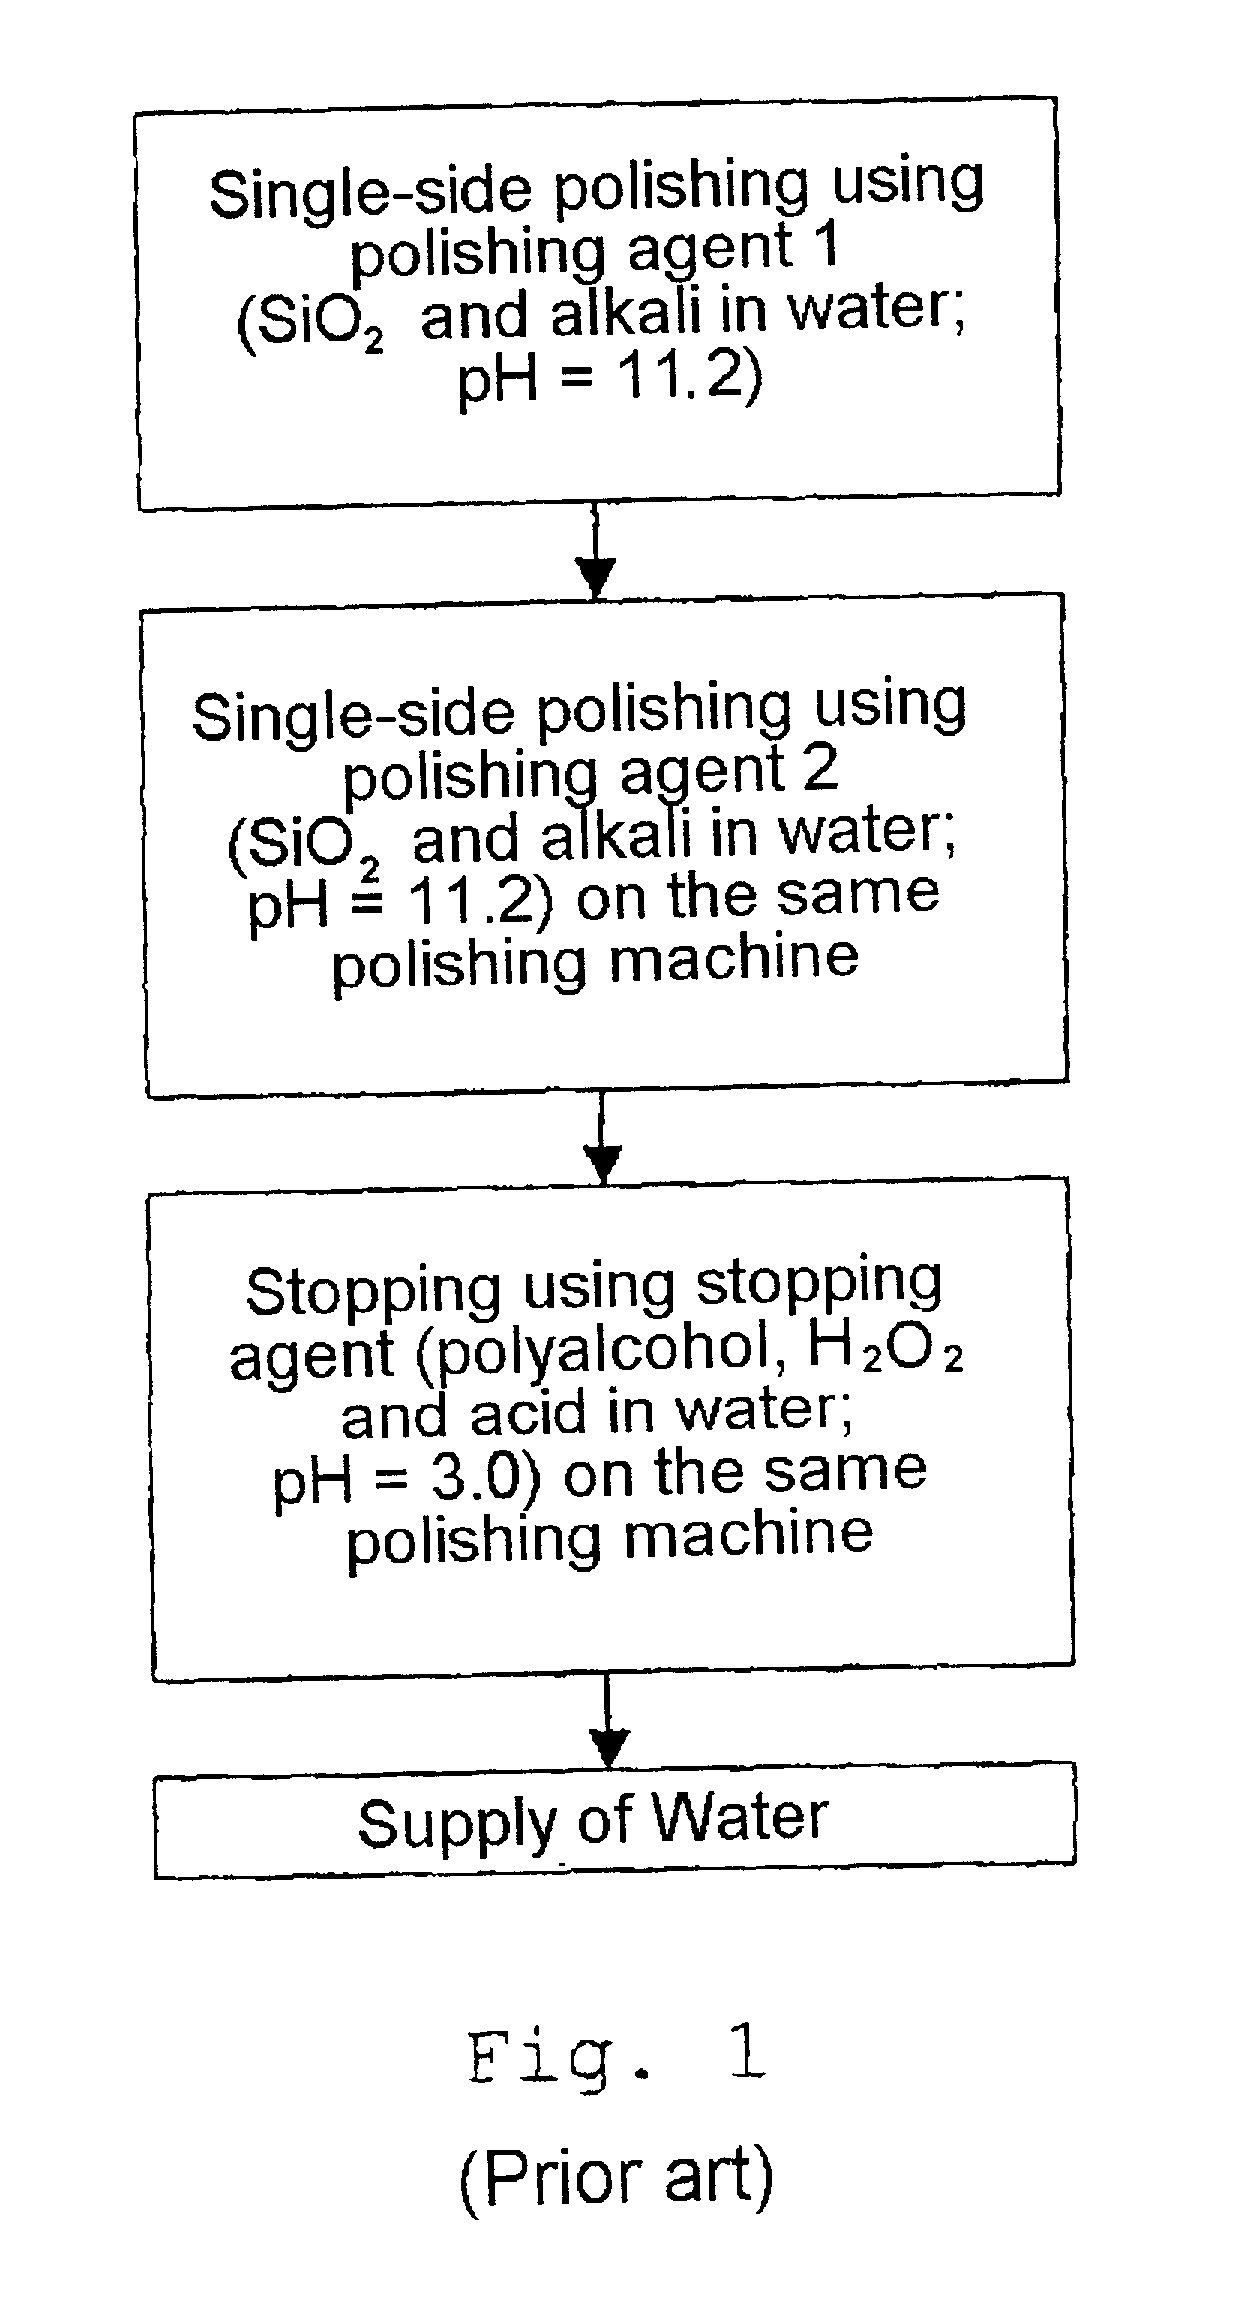 Process for polishing silicon wafers